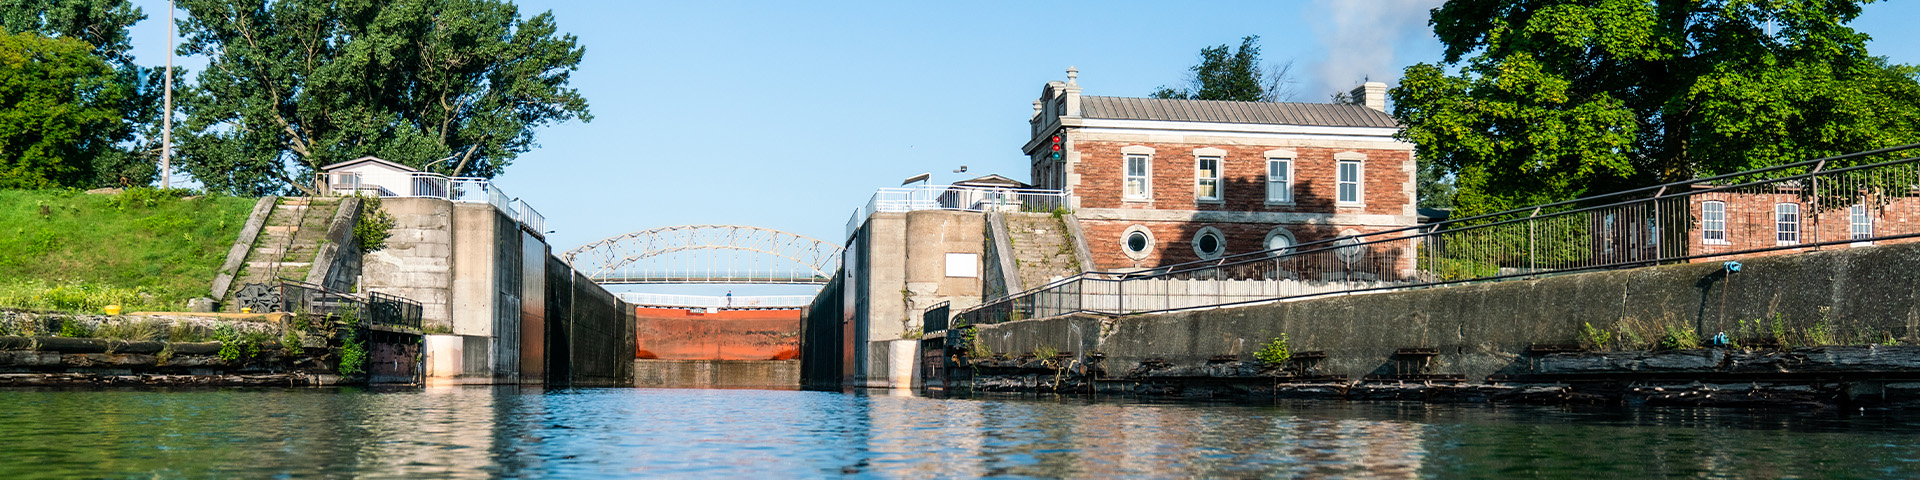 A view from the entrance of the lock.